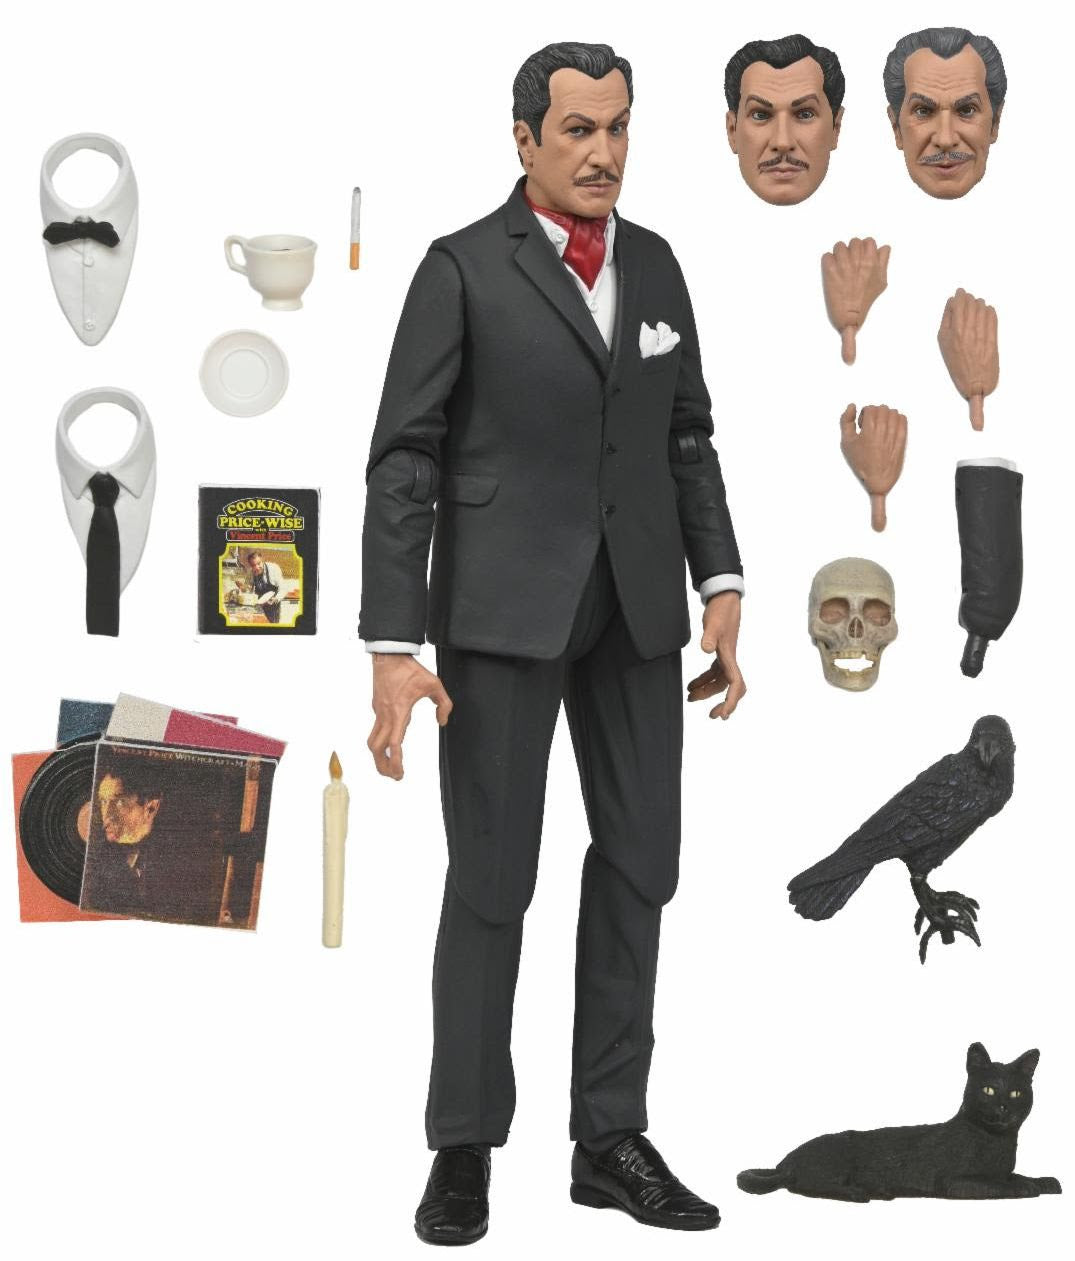 PRE-ORDER Vincent Price - 7" Scale Action Figure - Ultimate Vincent Price